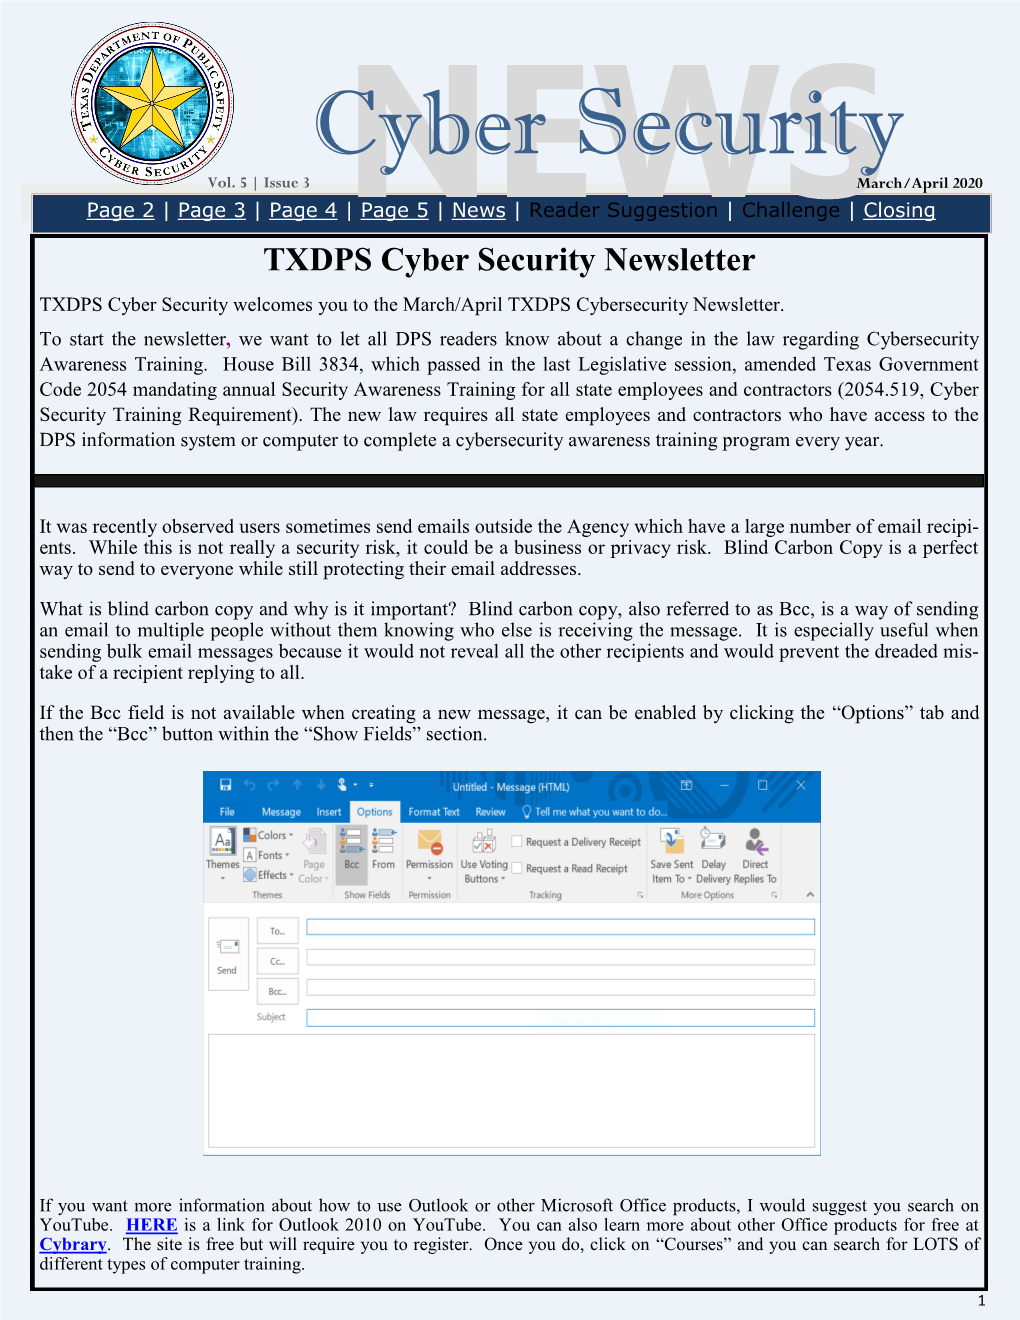 TXDPS Cyber Security Newsletter TXDPS Cyber Security Welcomes You to the March/April TXDPS Cybersecurity Newsletter